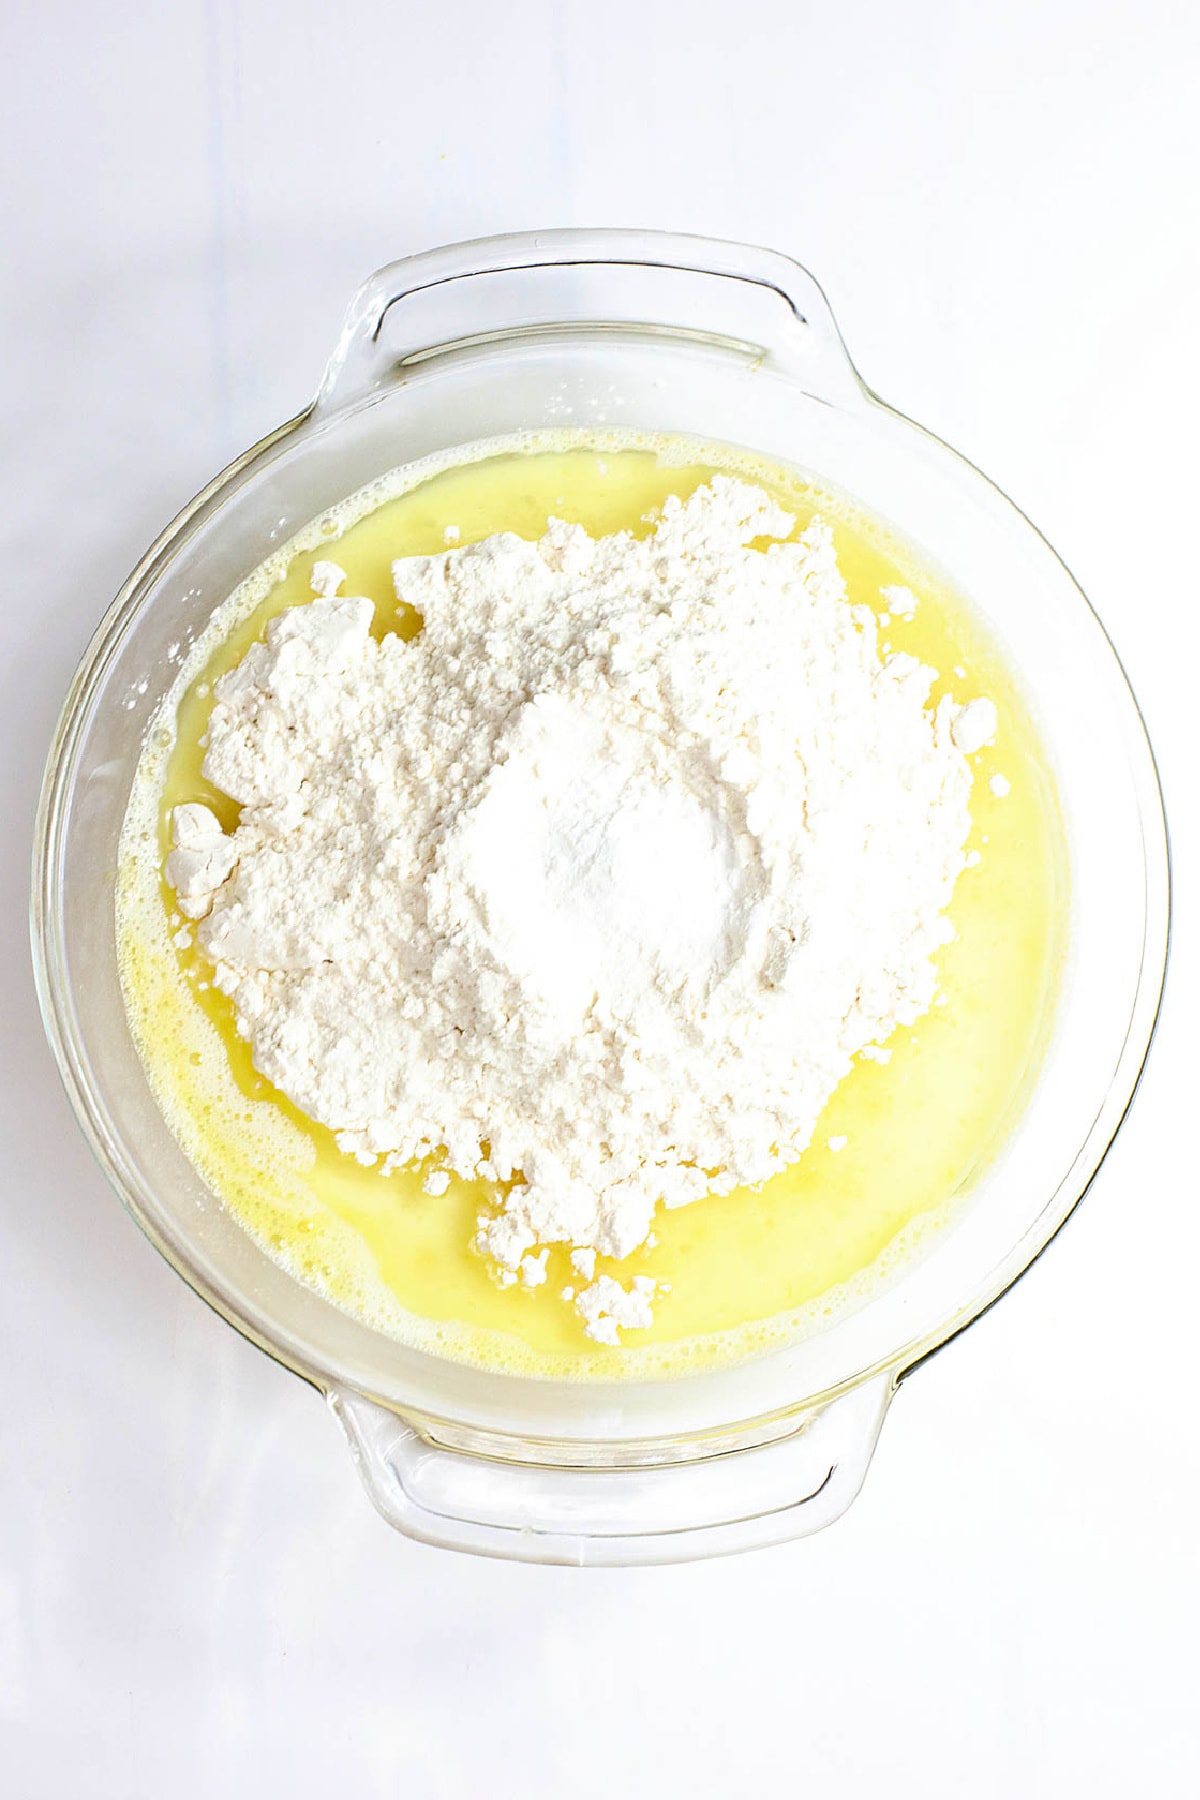 Flour added to egg and milk mixture in bowl